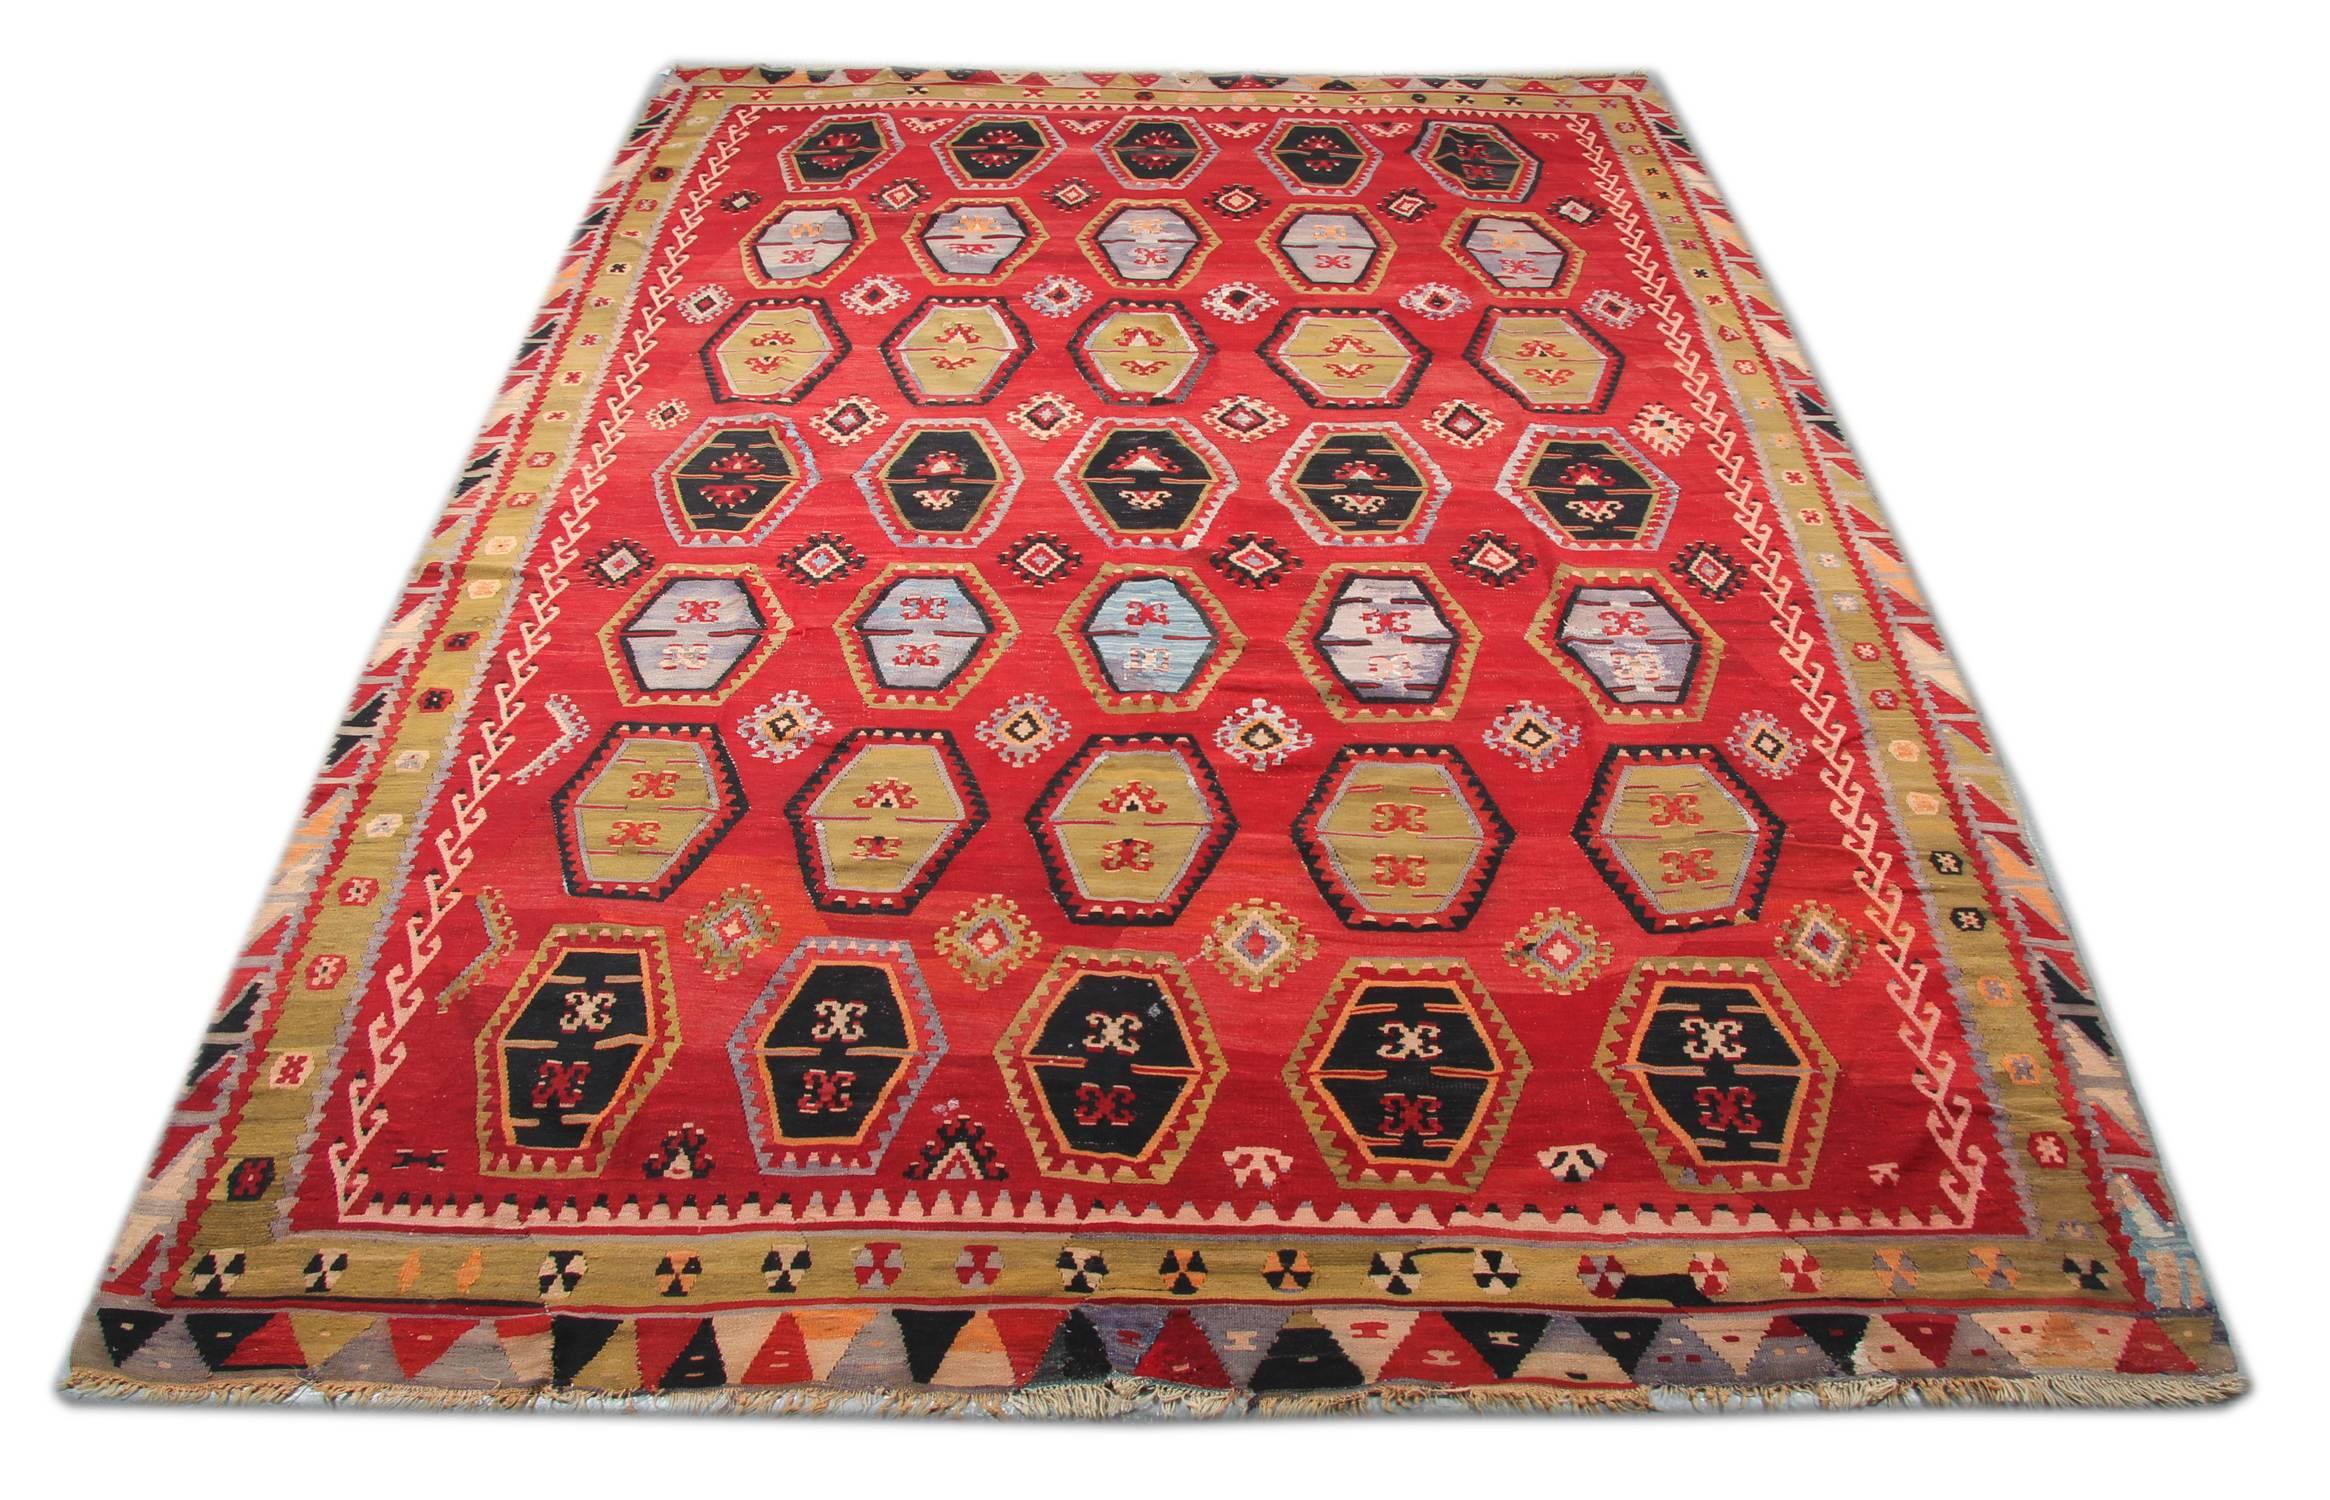 The Sarkisla Kilim rugs are one of the most decorative rugs, Turkish Kilim can be an additional element of design to one's home decor.
Most Kilims can always be in harmony with the interior and will be complementary with art and architecture of most